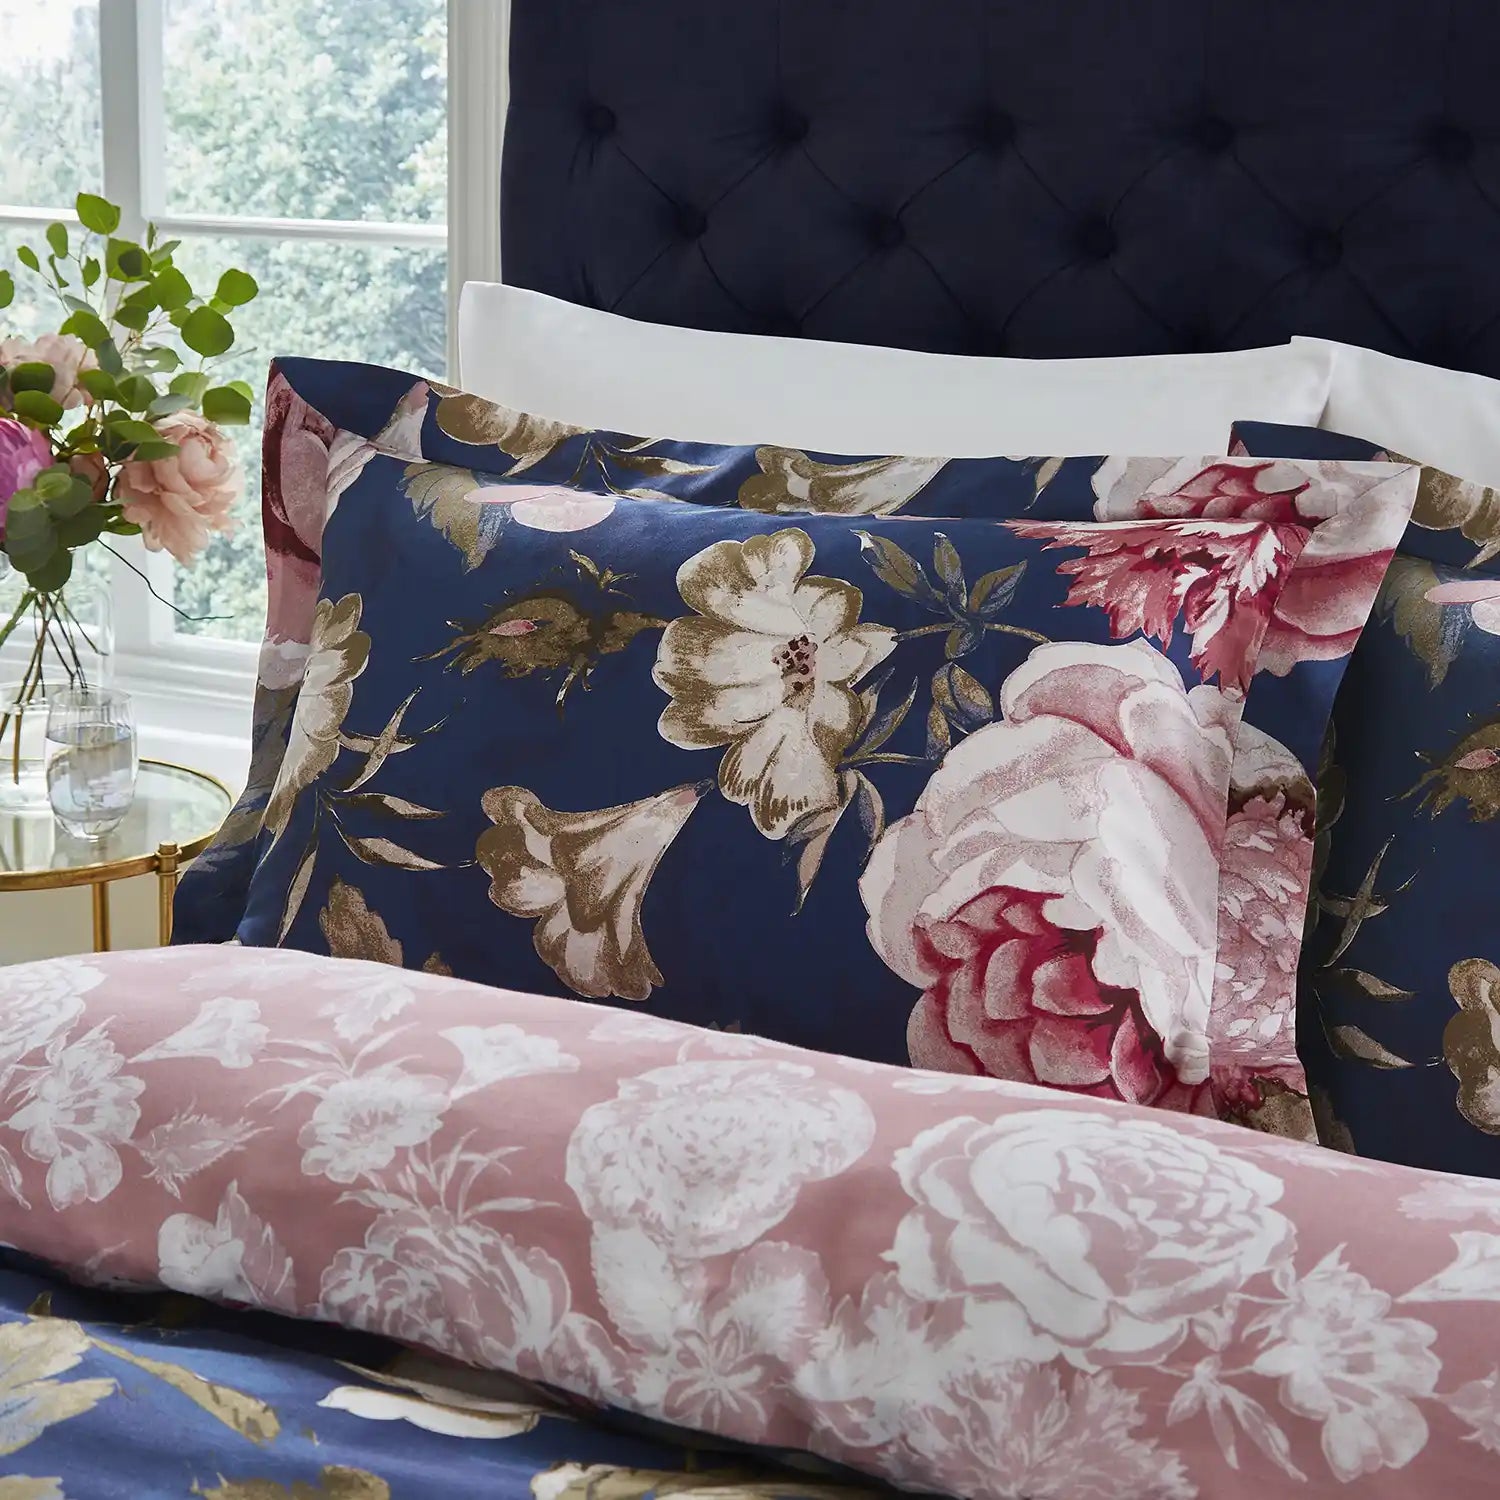  Dorma 300 Thread Count Pure Cotton Sateen Constance Floral Duvet Cover - Navy Floral 2 Shaws Department Stores